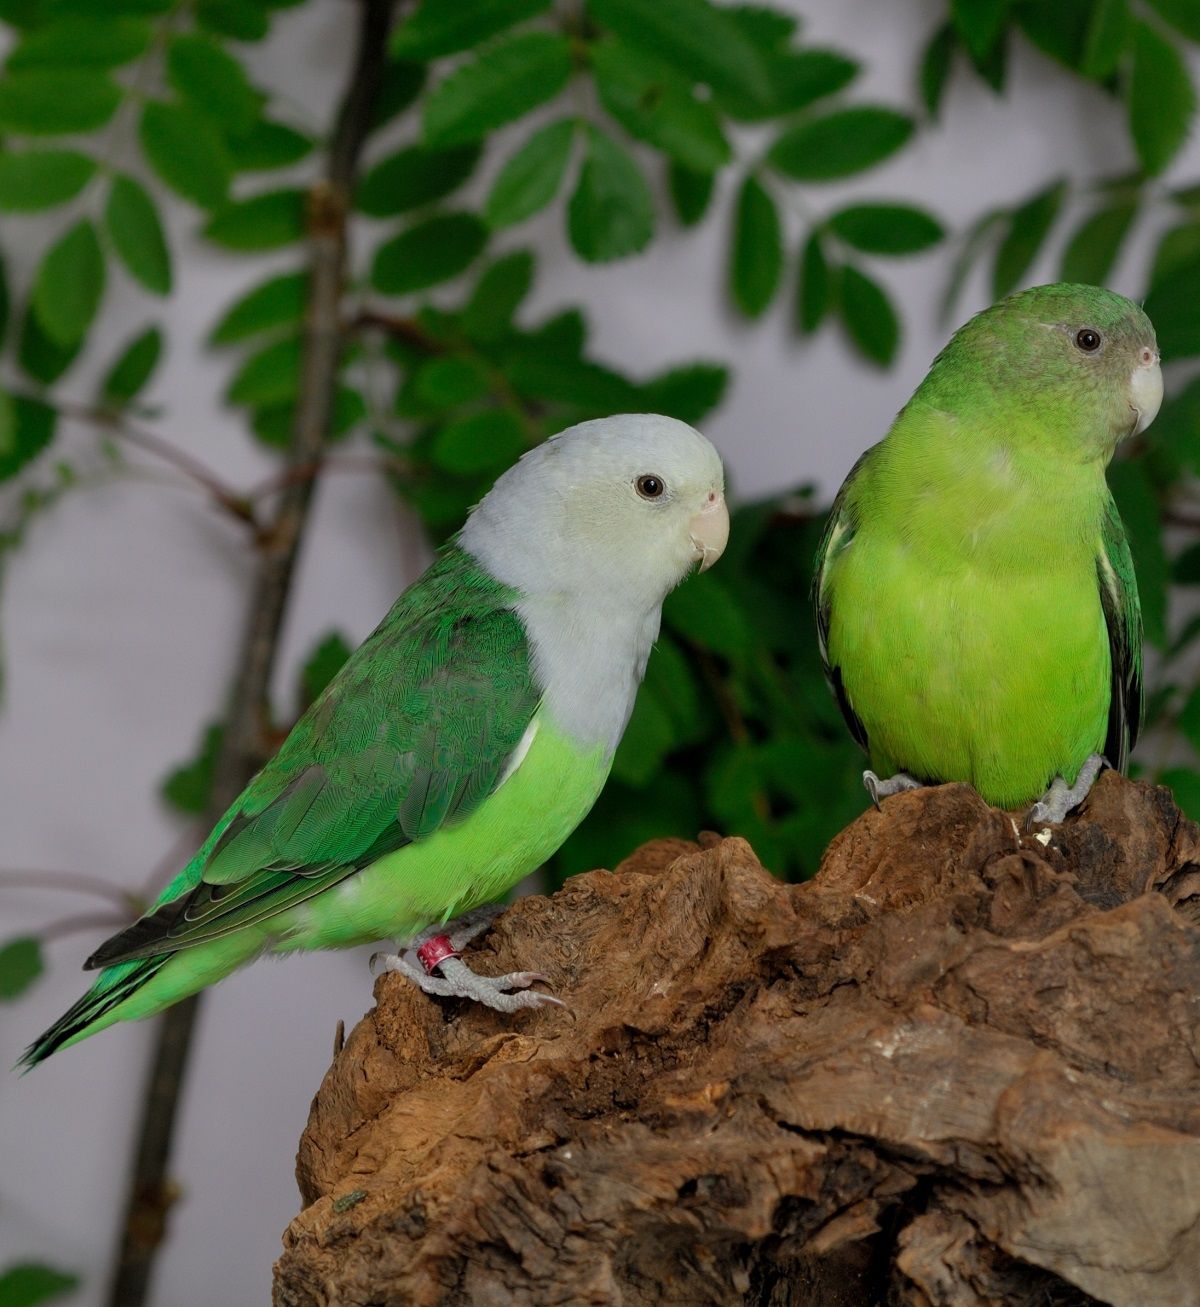 Agapornis canus (grey-headed lovebird), one of the more uncommon types of lovebirds in aviculture.